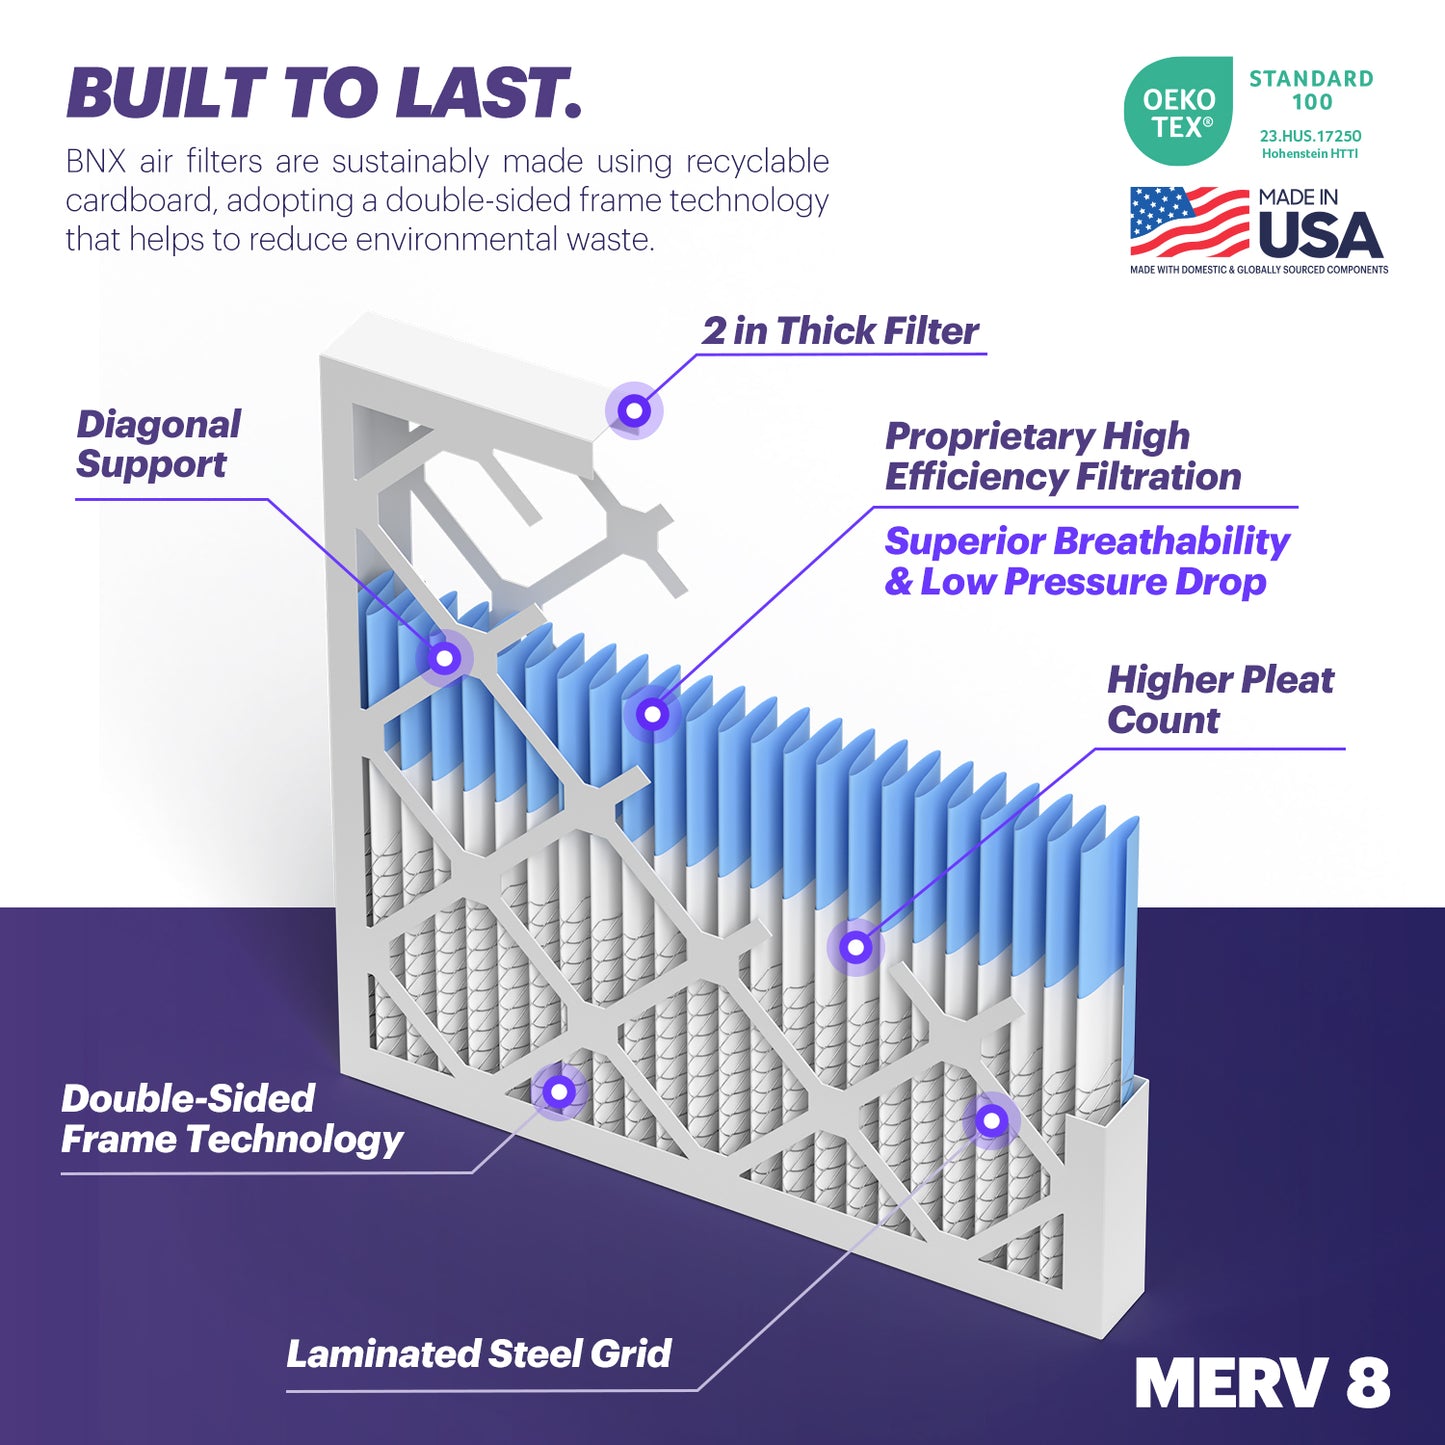 BNX TruFilter 16x25x2 MERV 8 Pleated Air Filter – Made in USA (2-Pack)